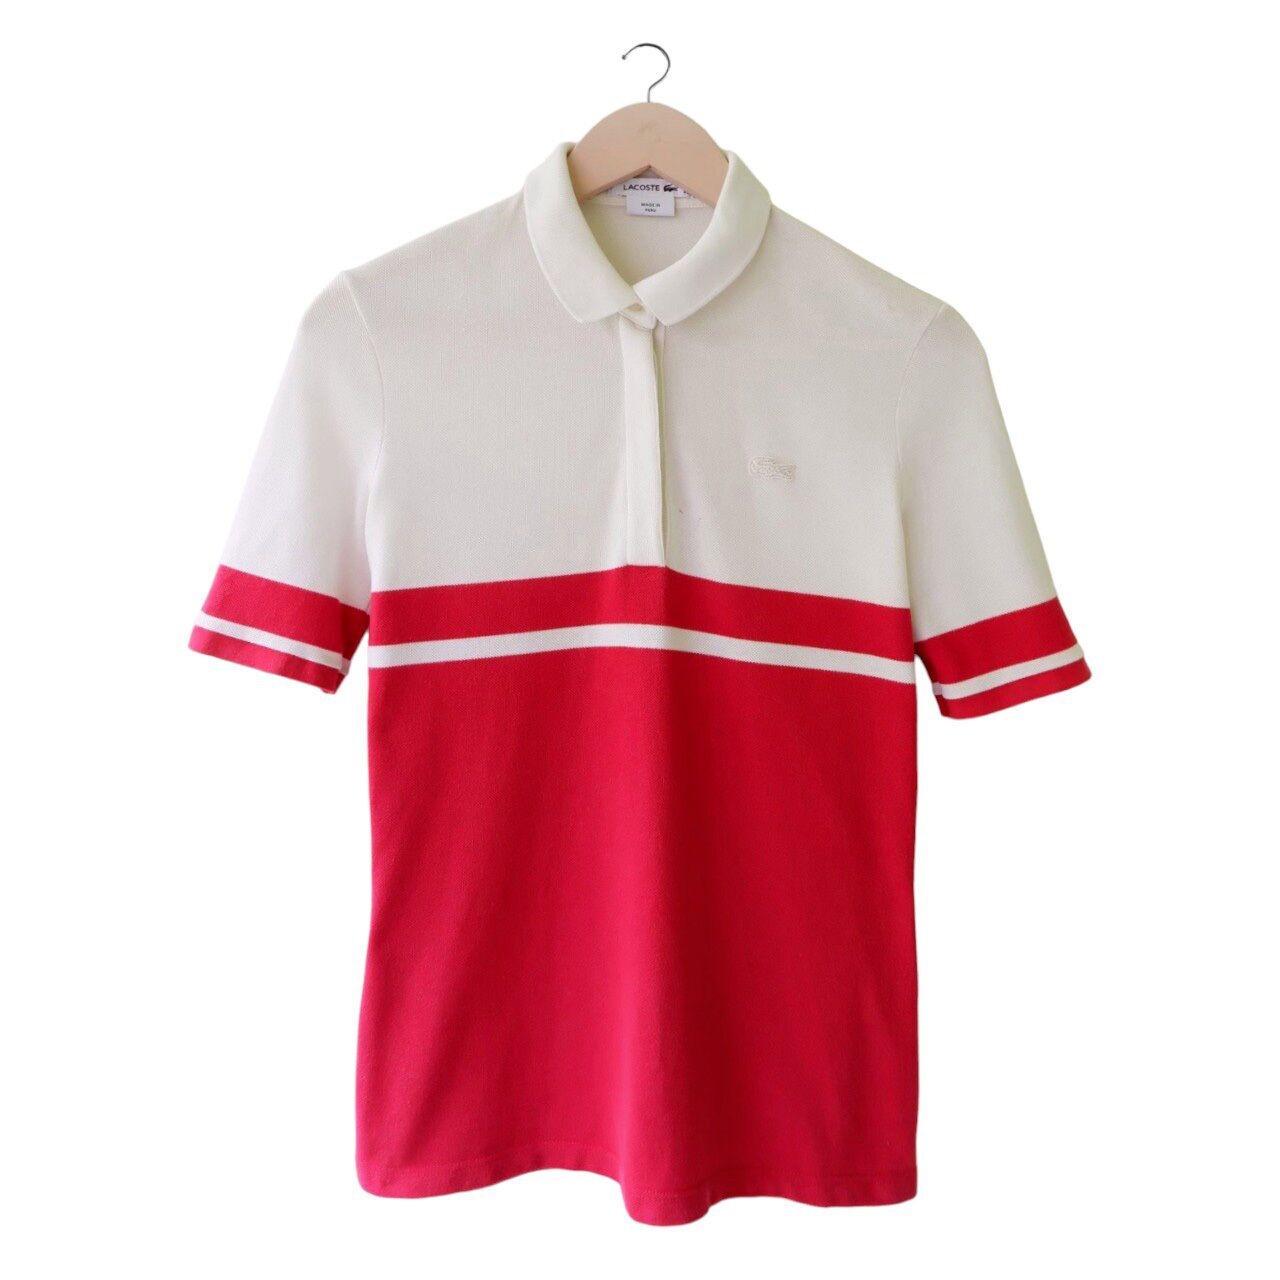 Lacoste Red White Polo T-Shirt 